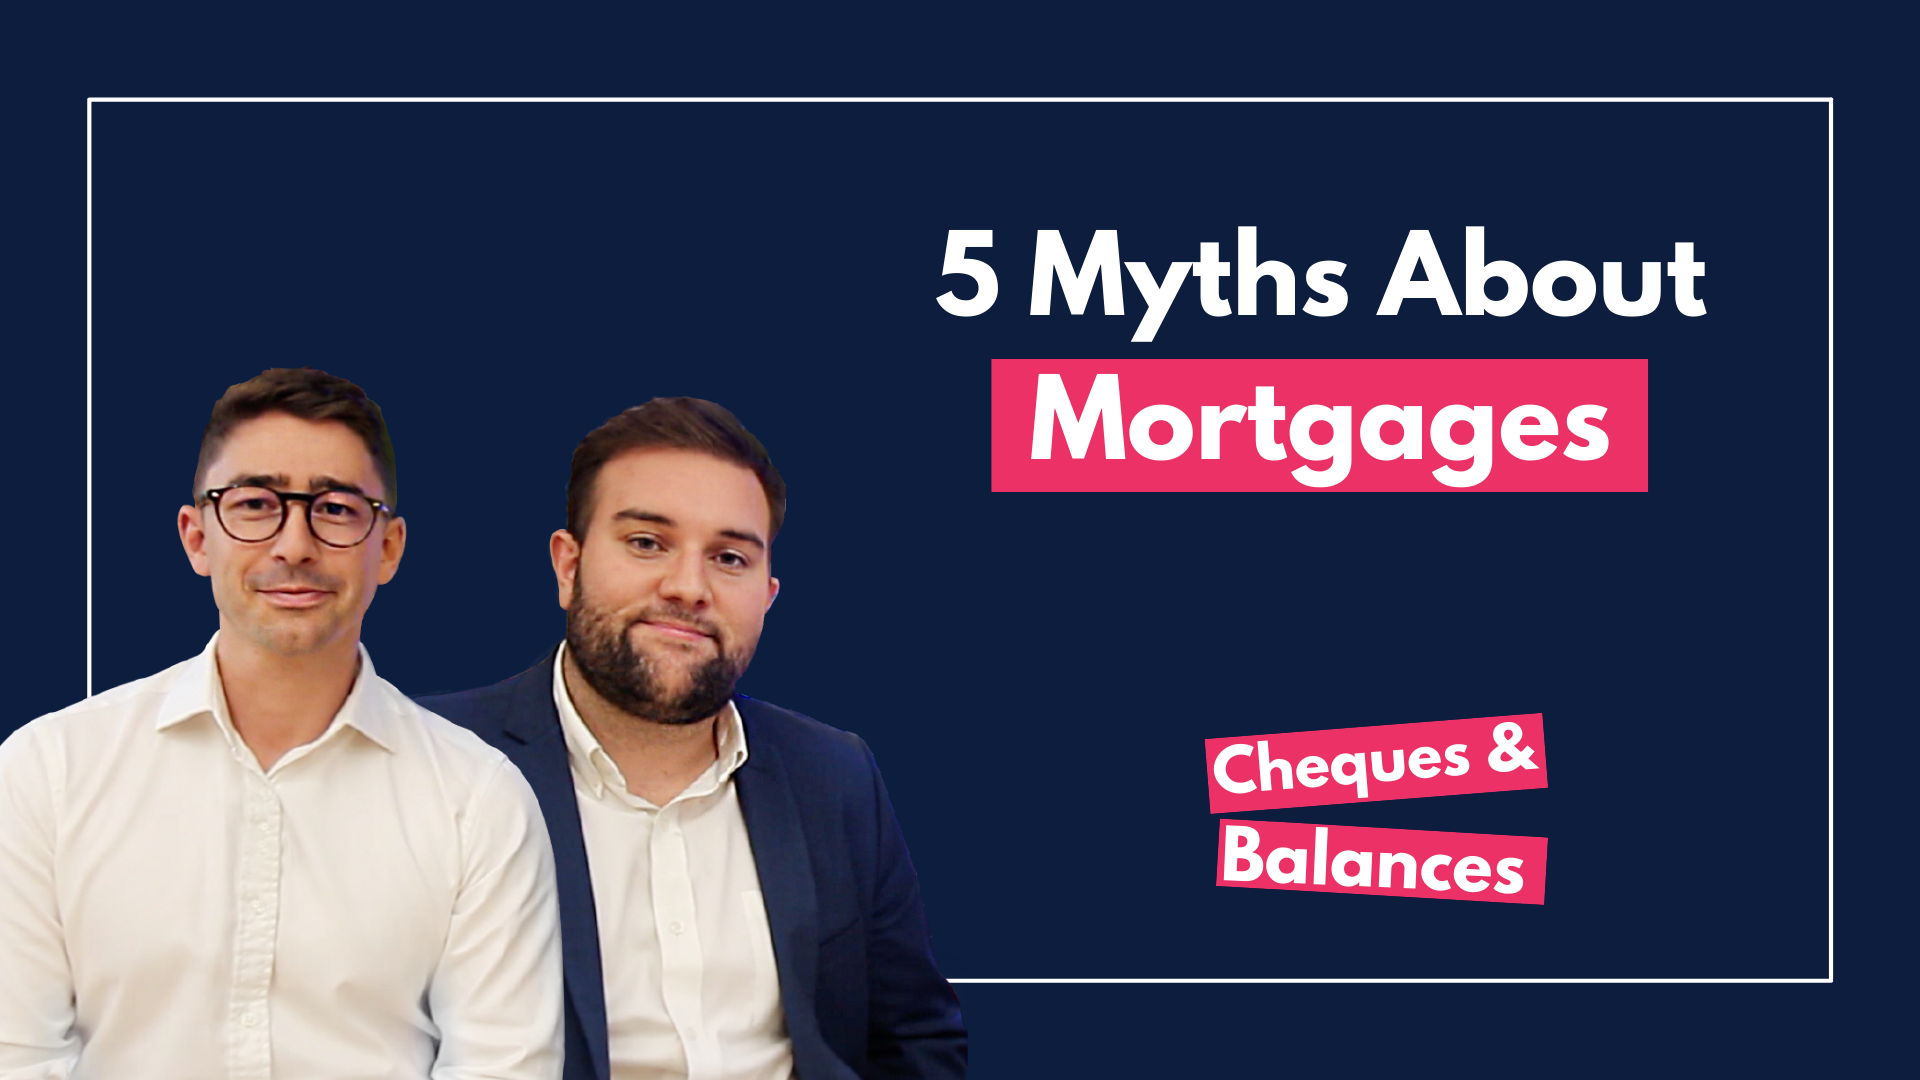 5 Myths About Mortgage Applications